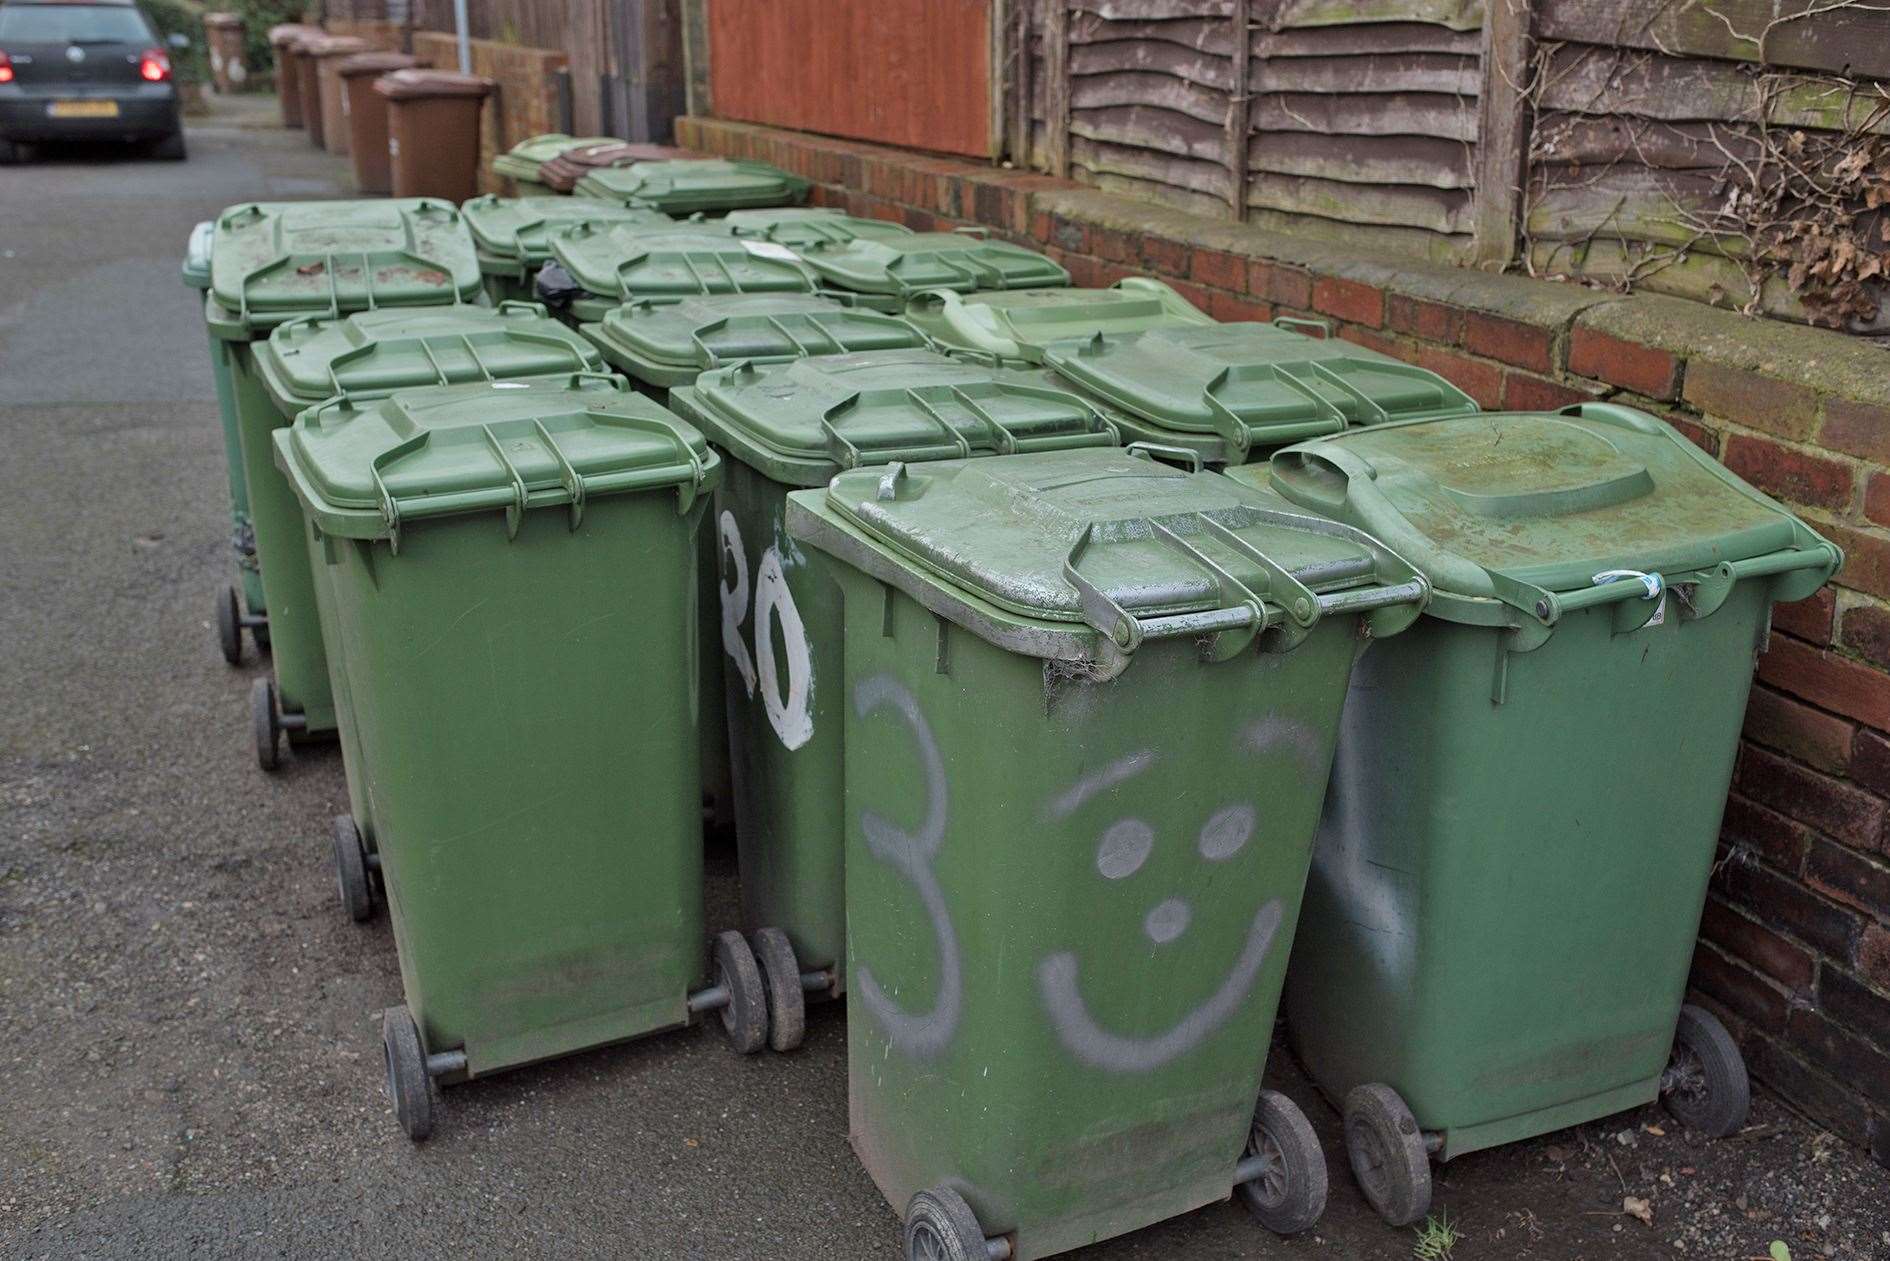 Plans by Highland Council to introduce new bins have prompted criticism.